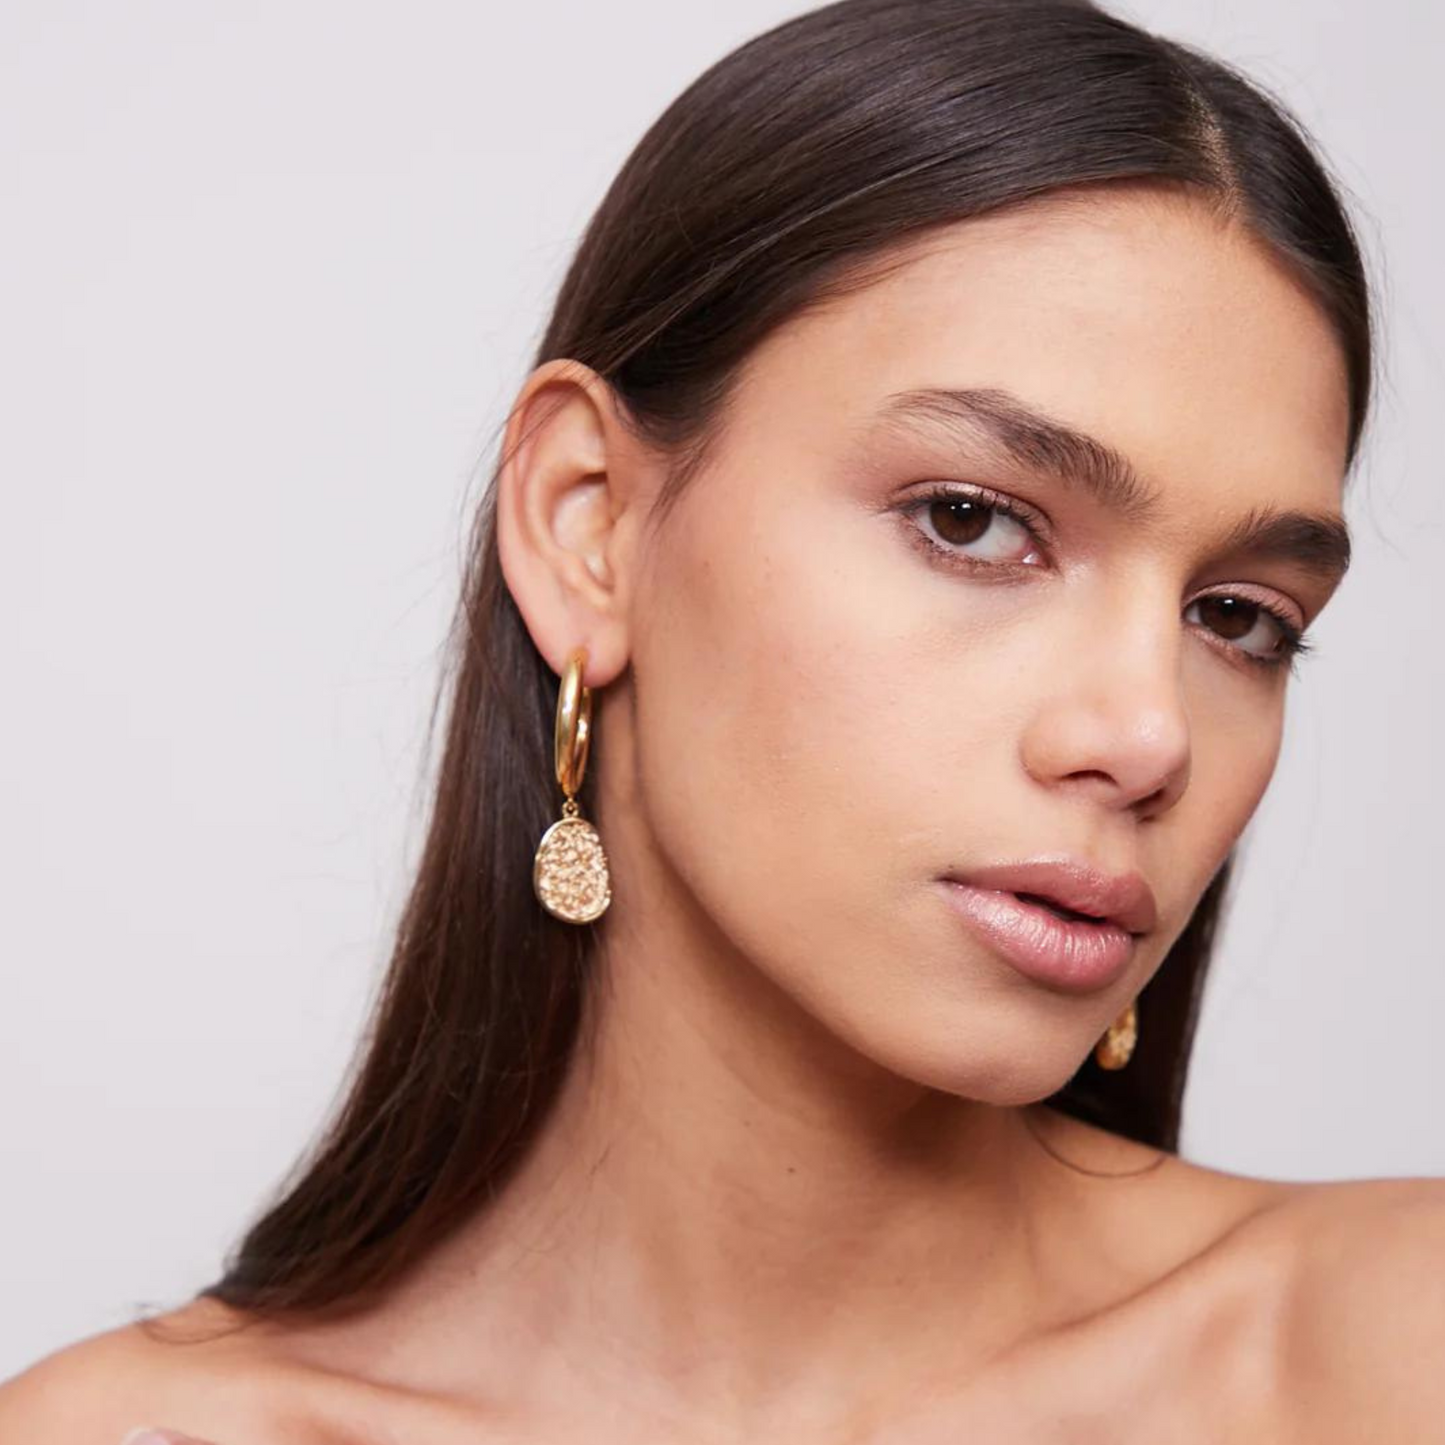 Handmade light gold hoops showcasing a unique fusion of modern aesthetics and delicate crochet craftsmanship.